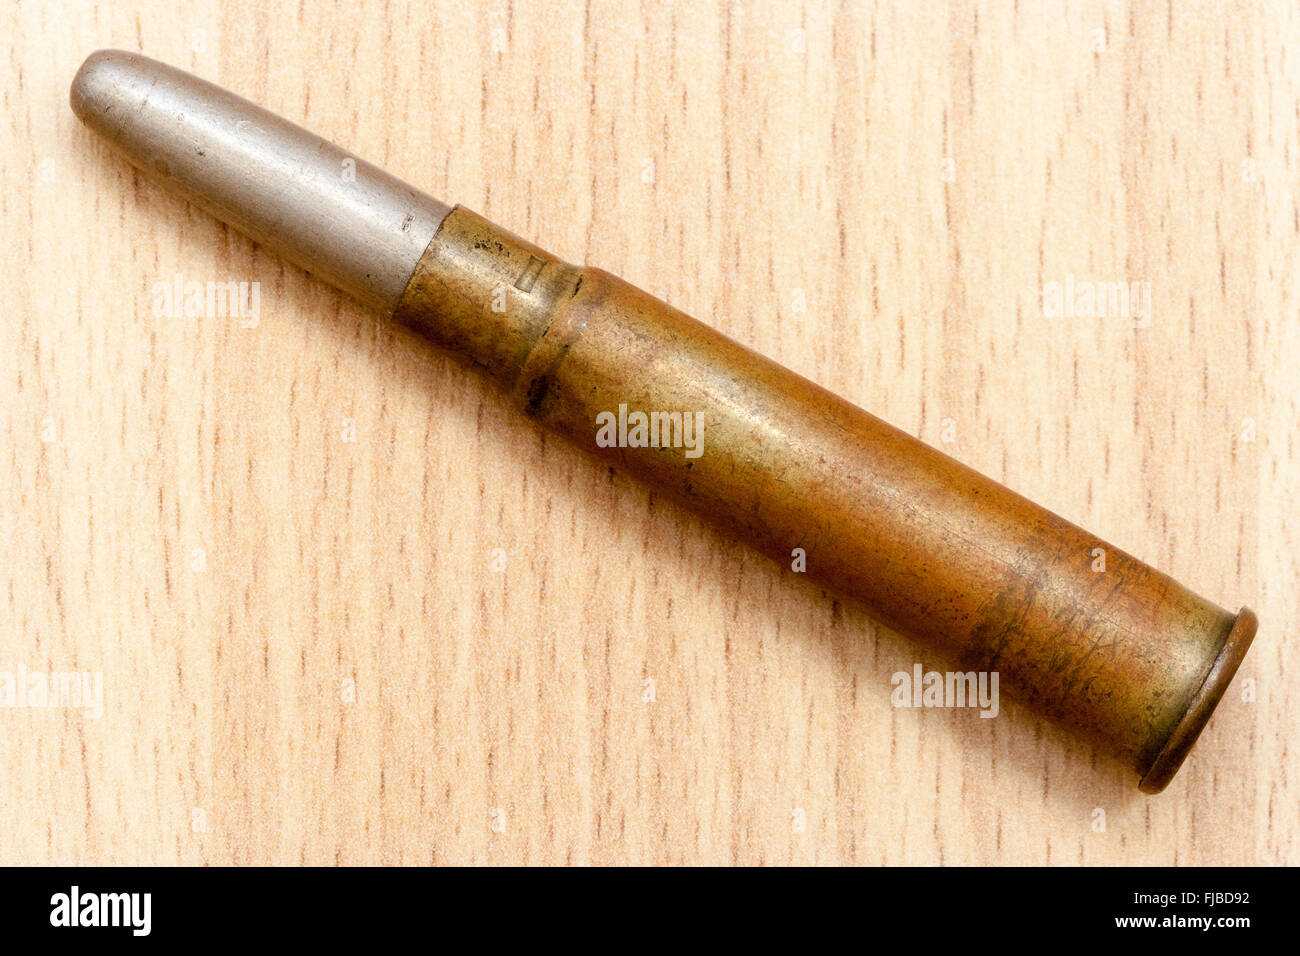 Machine gun bullet from the first world war against wood grain background  Stock Photo - Alamy